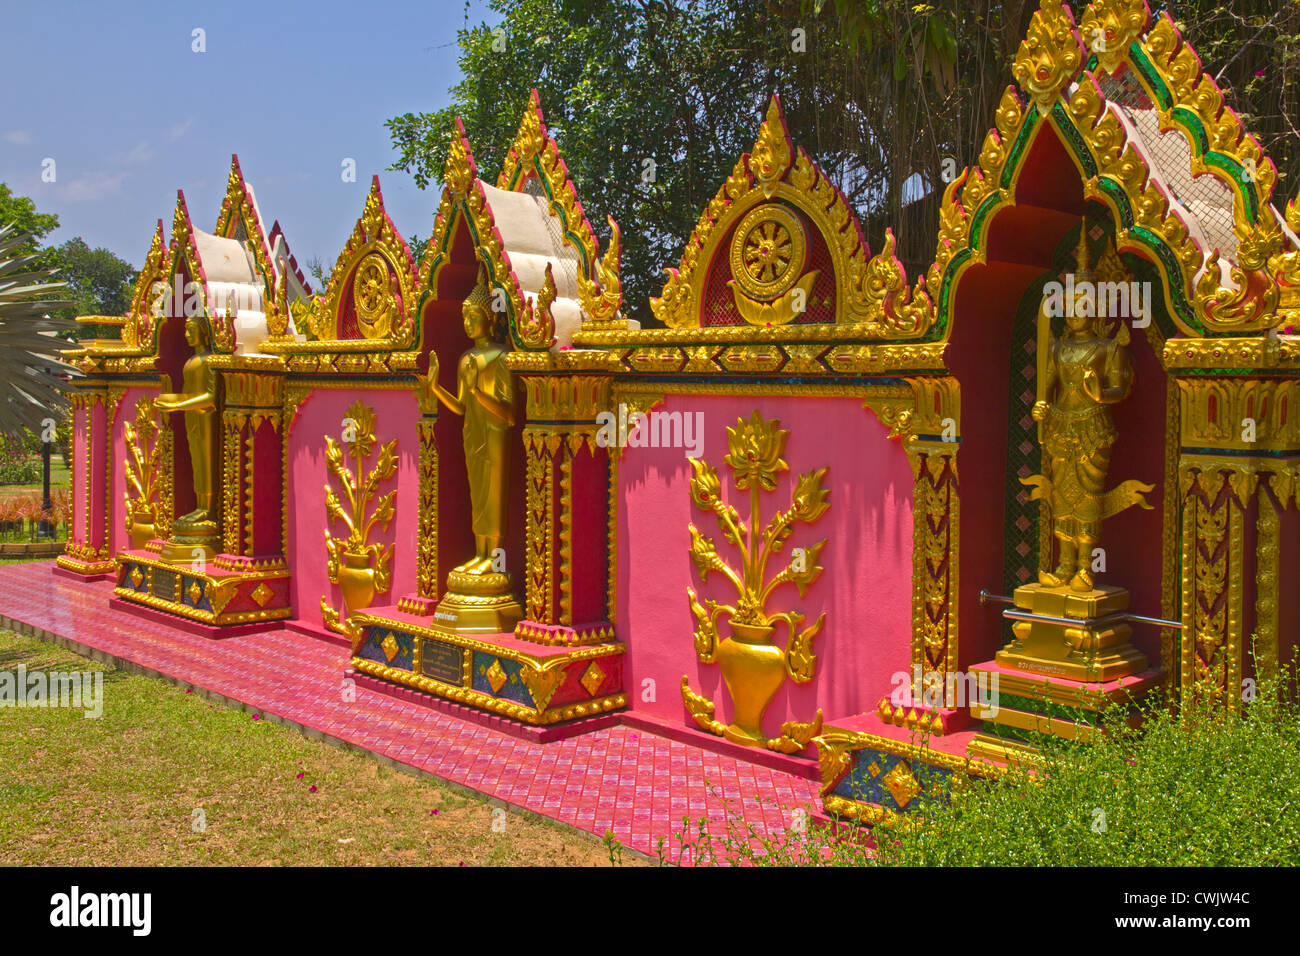 Buddhas highly decorated in Pink and Gold in Wat Nai Tong garden, Phuket Stock Photo